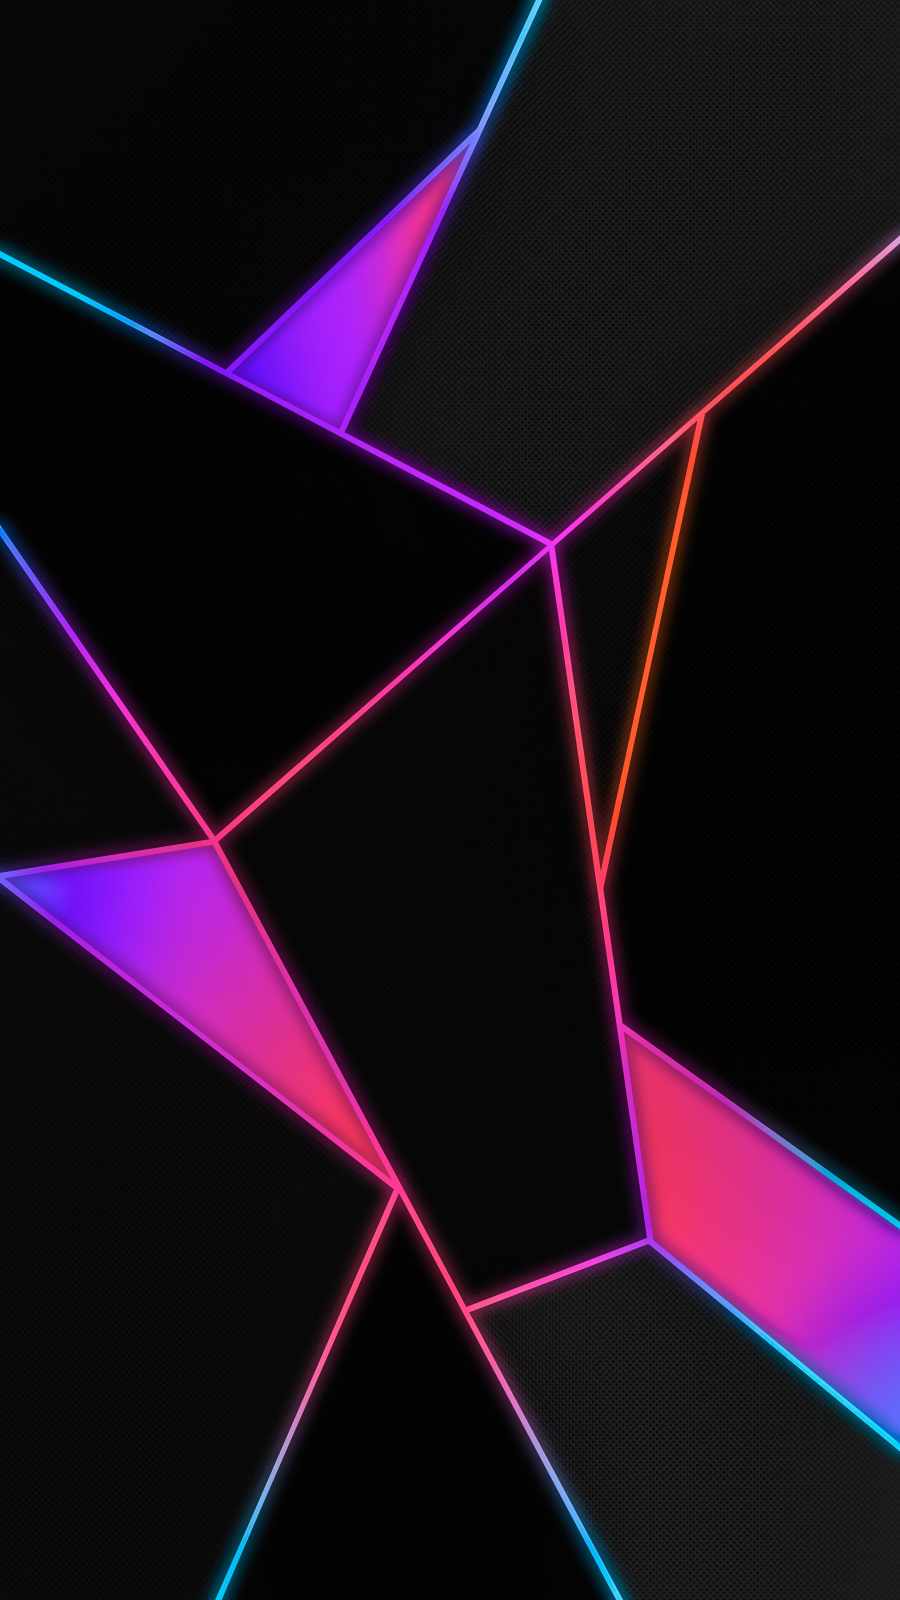 Abstract Neon Lines IPhone Wallpaper - IPhone Wallpapers : iPhone Wallpapers